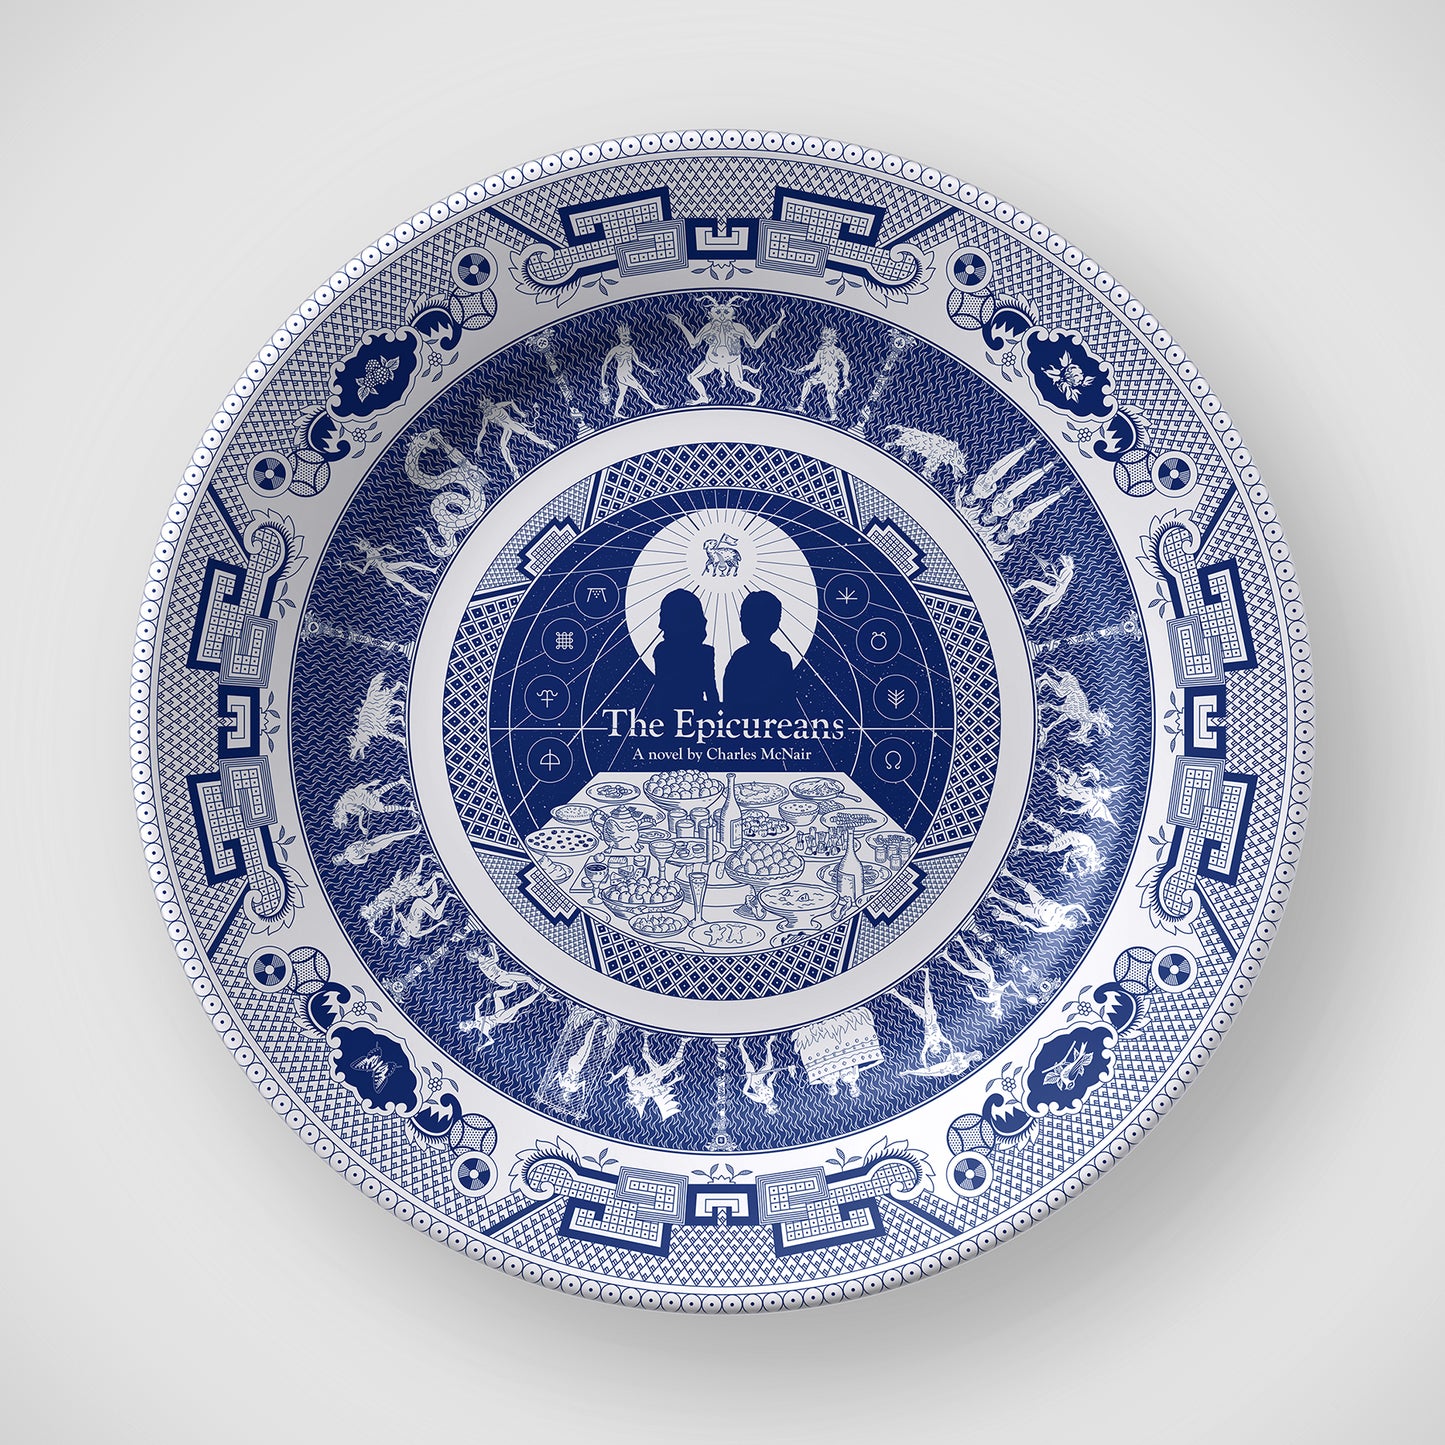 The Epicureans Limited-Edition Collectible Ceramic Plate